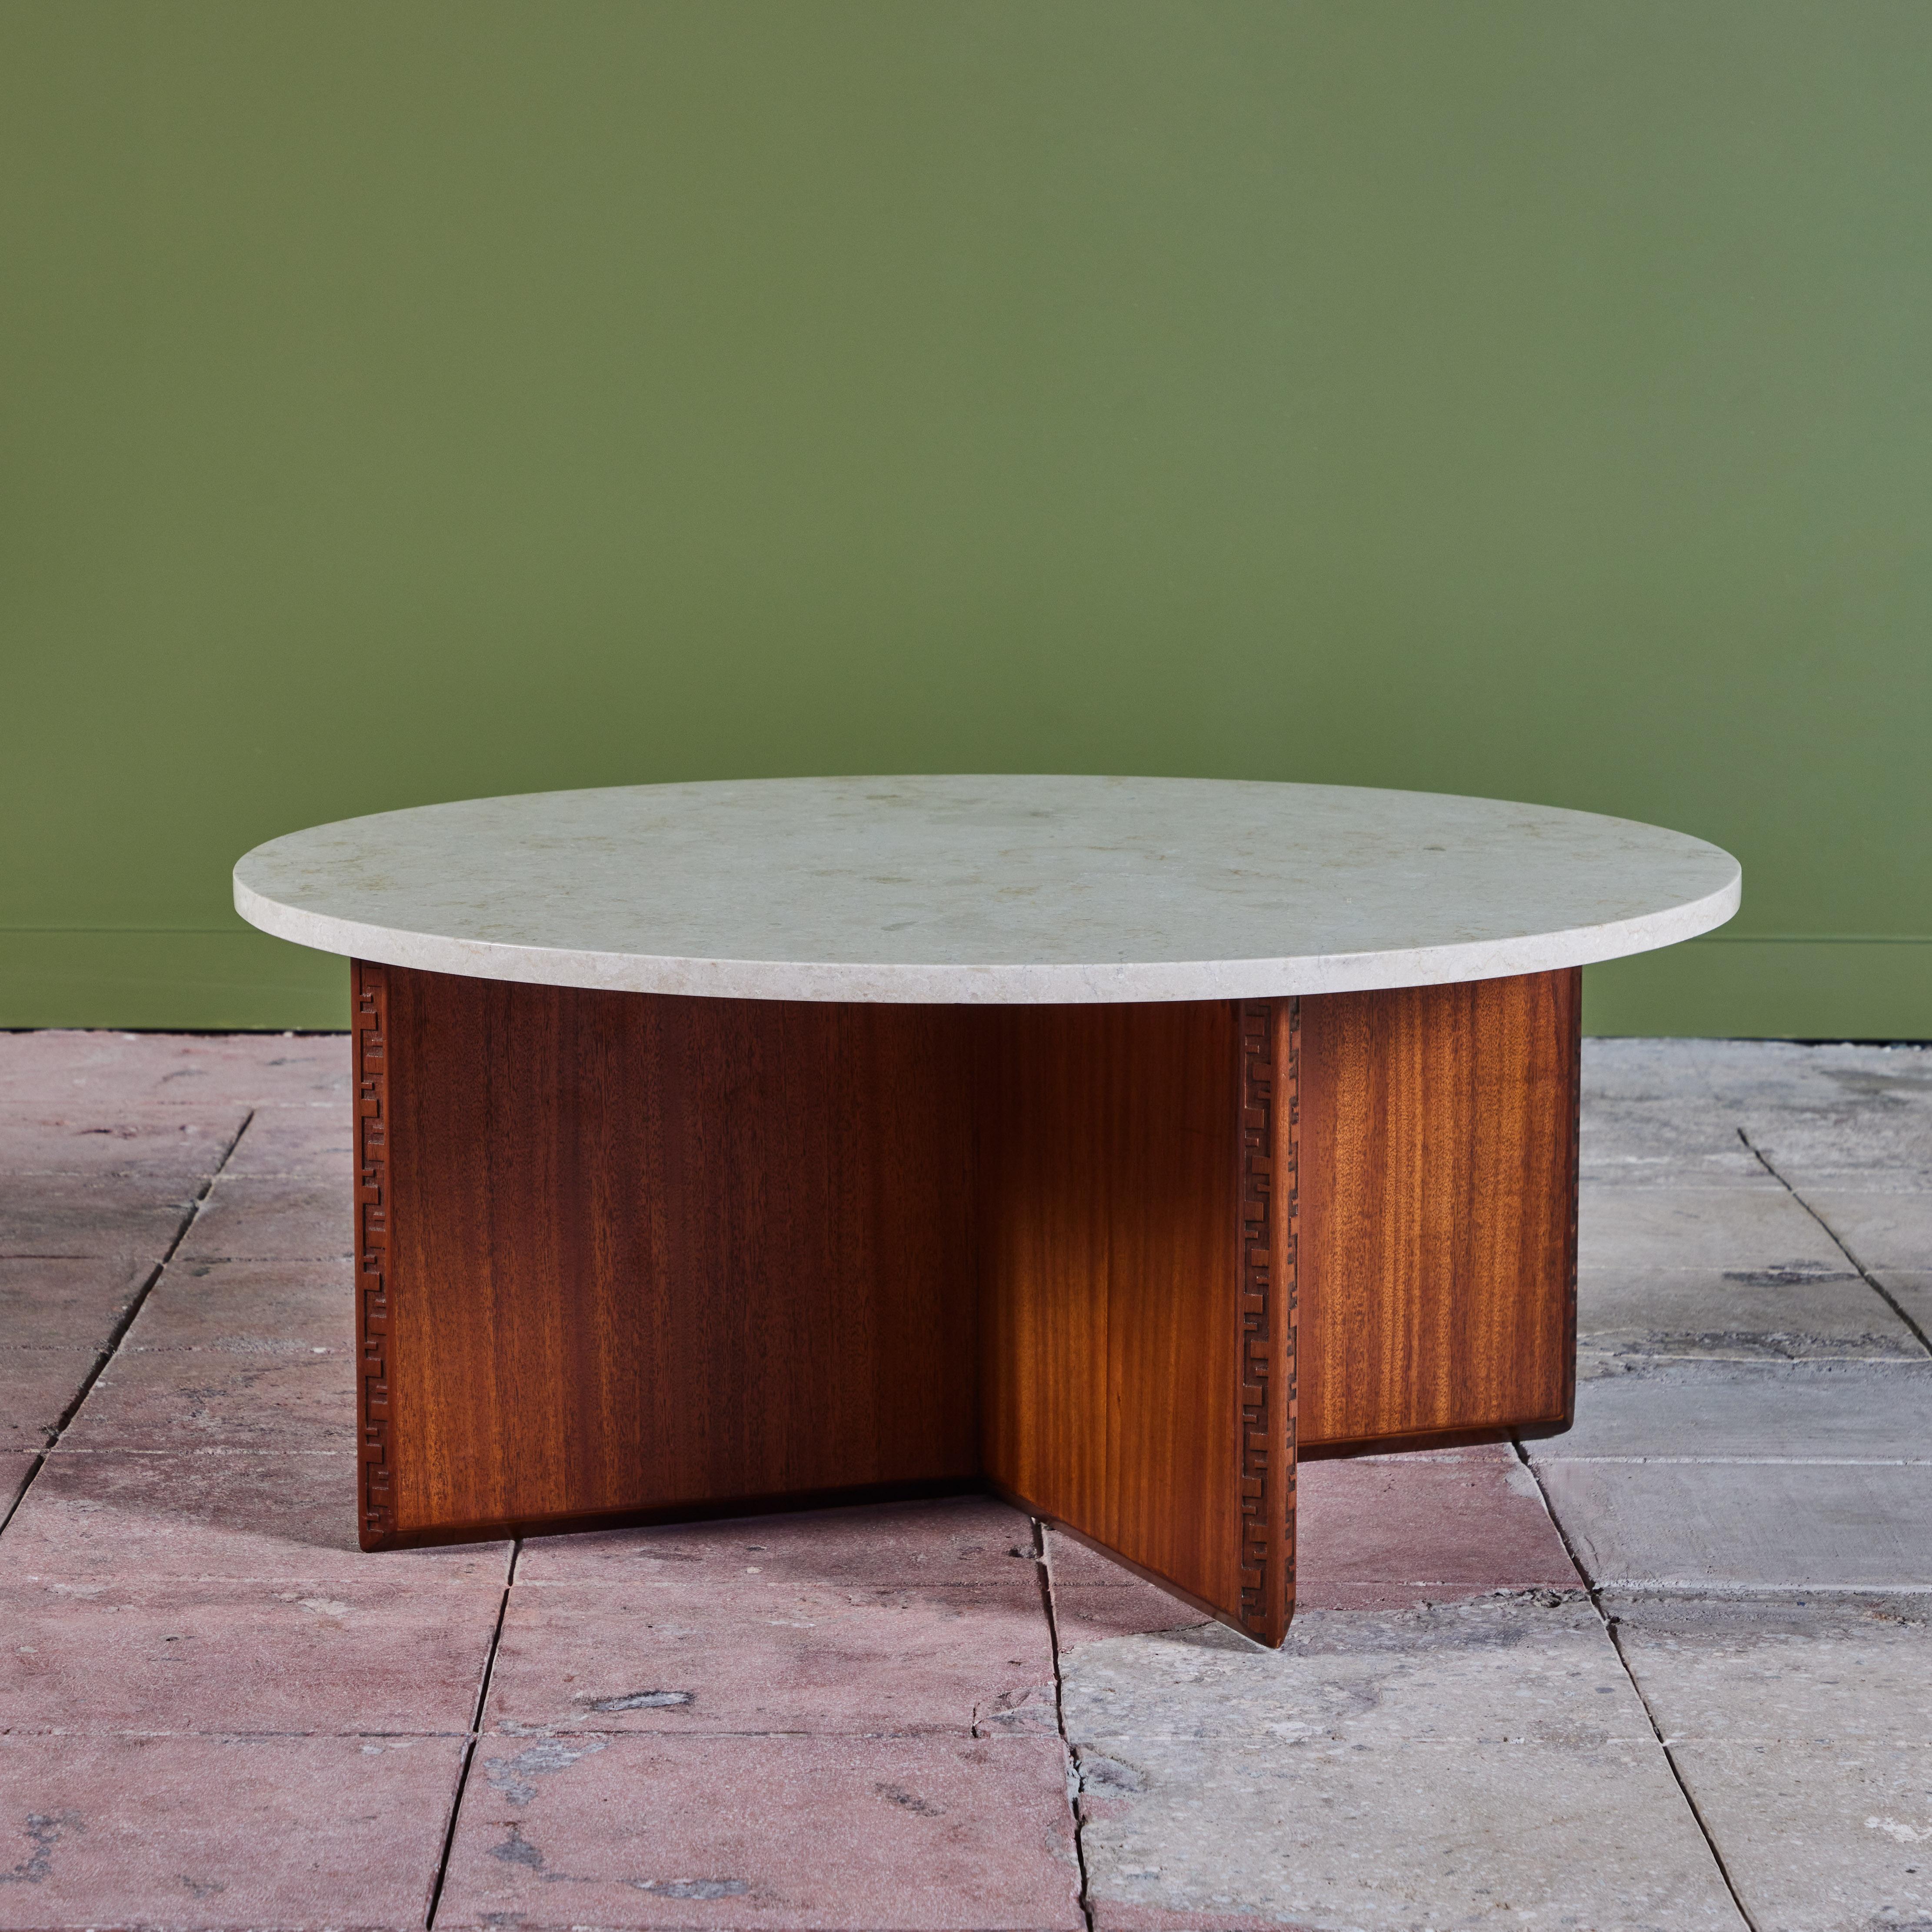 Round marble top coffee table in Honduran mahogany designed by Frank Lloyd Wright for Heritage-Henredon in 1955. The beveled edge of the coffee table is graced the Taliesin signature: an engraved Greek key motif. Two V-shaped segments form the legs